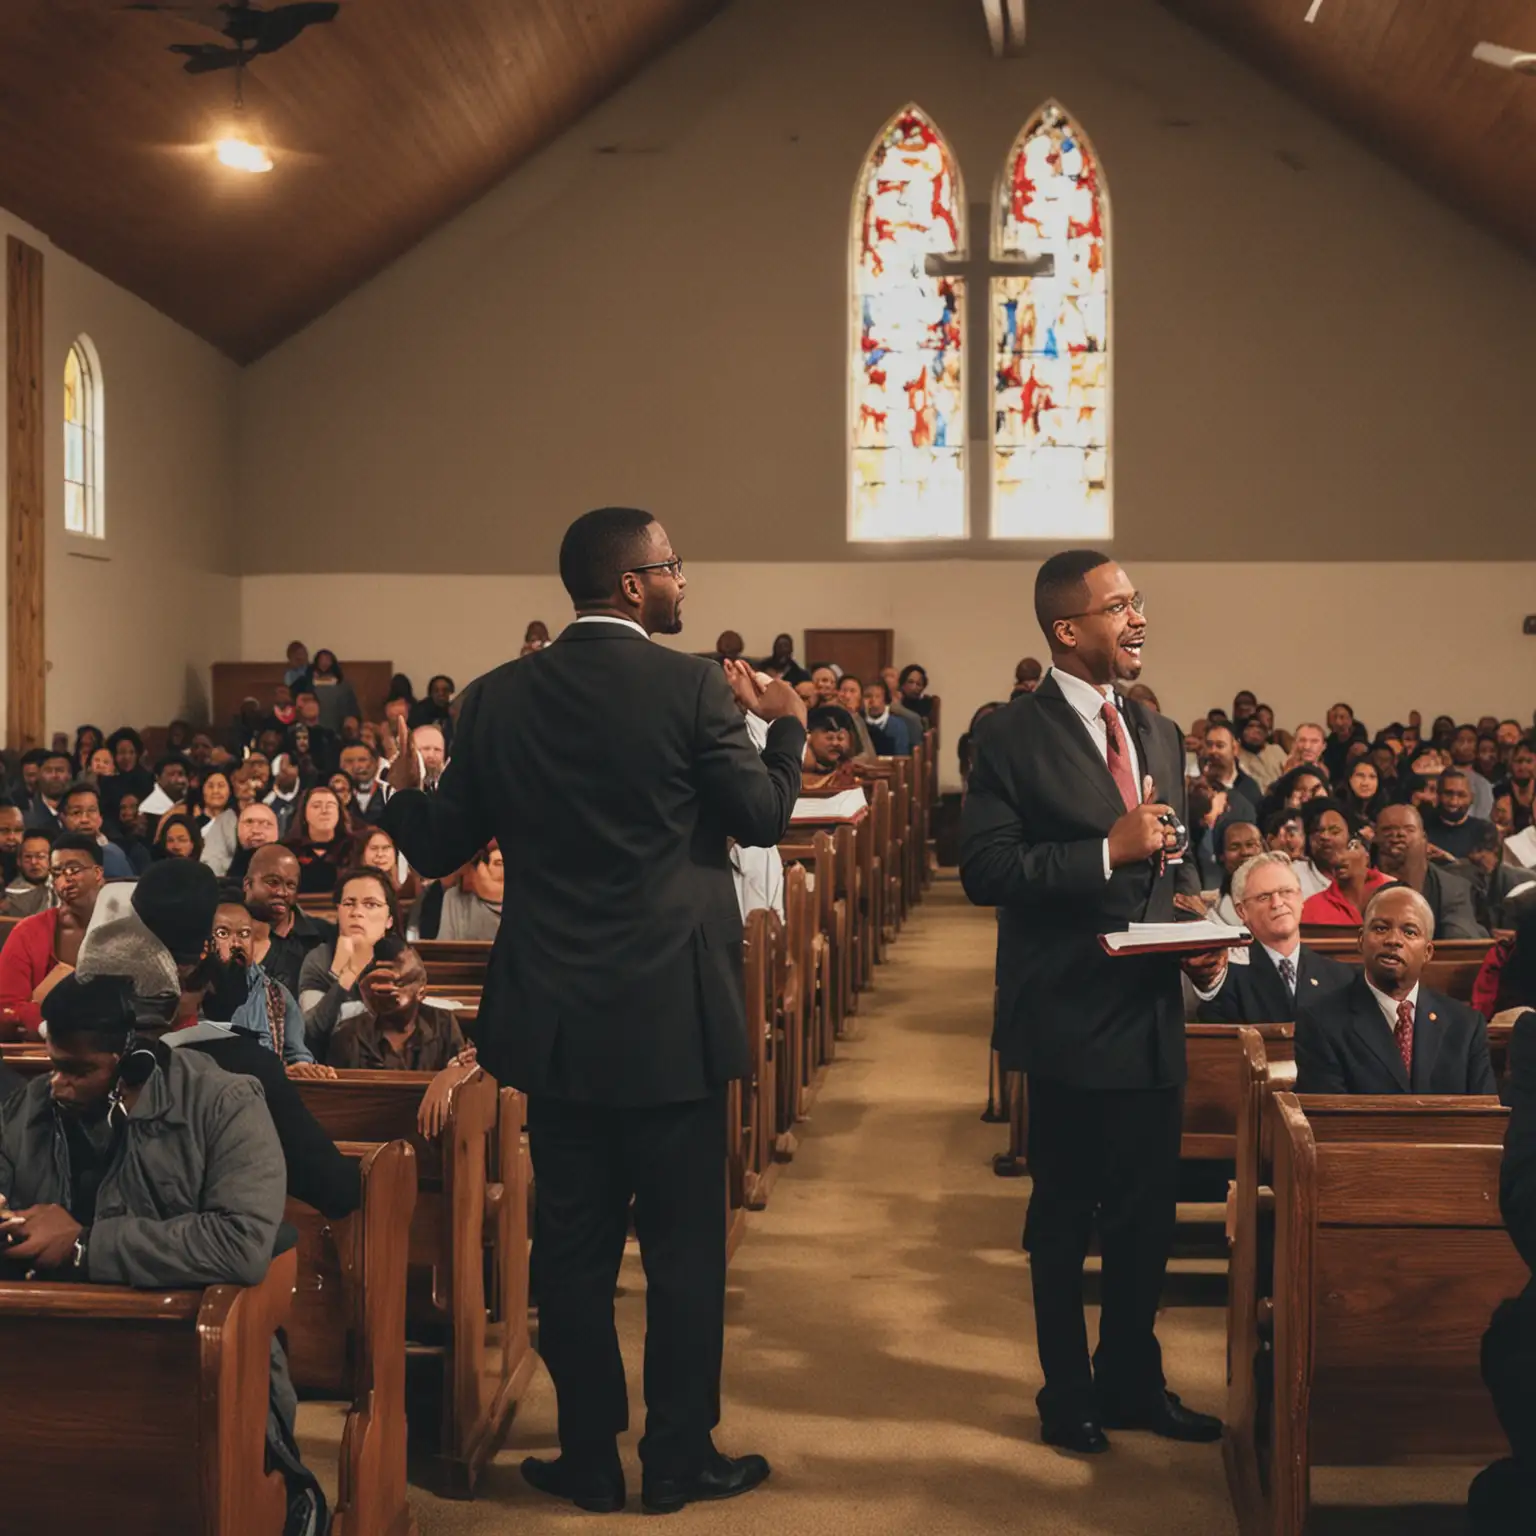 Dynamic Pastors Preaching to Expand Congregation